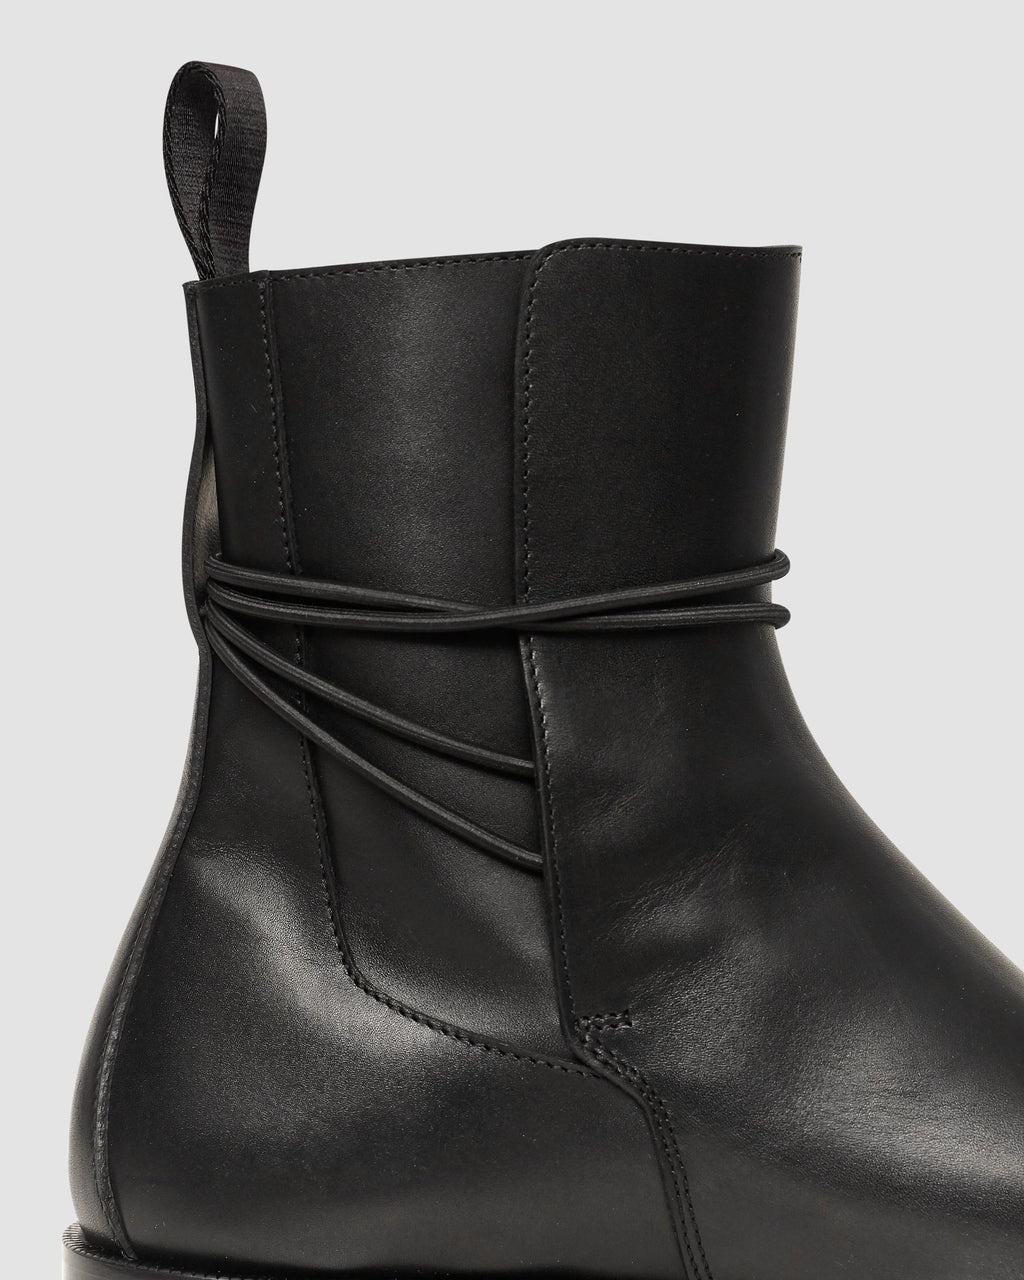 LOW BUCKLE BOOT WITH LEATHER SOLE - 7